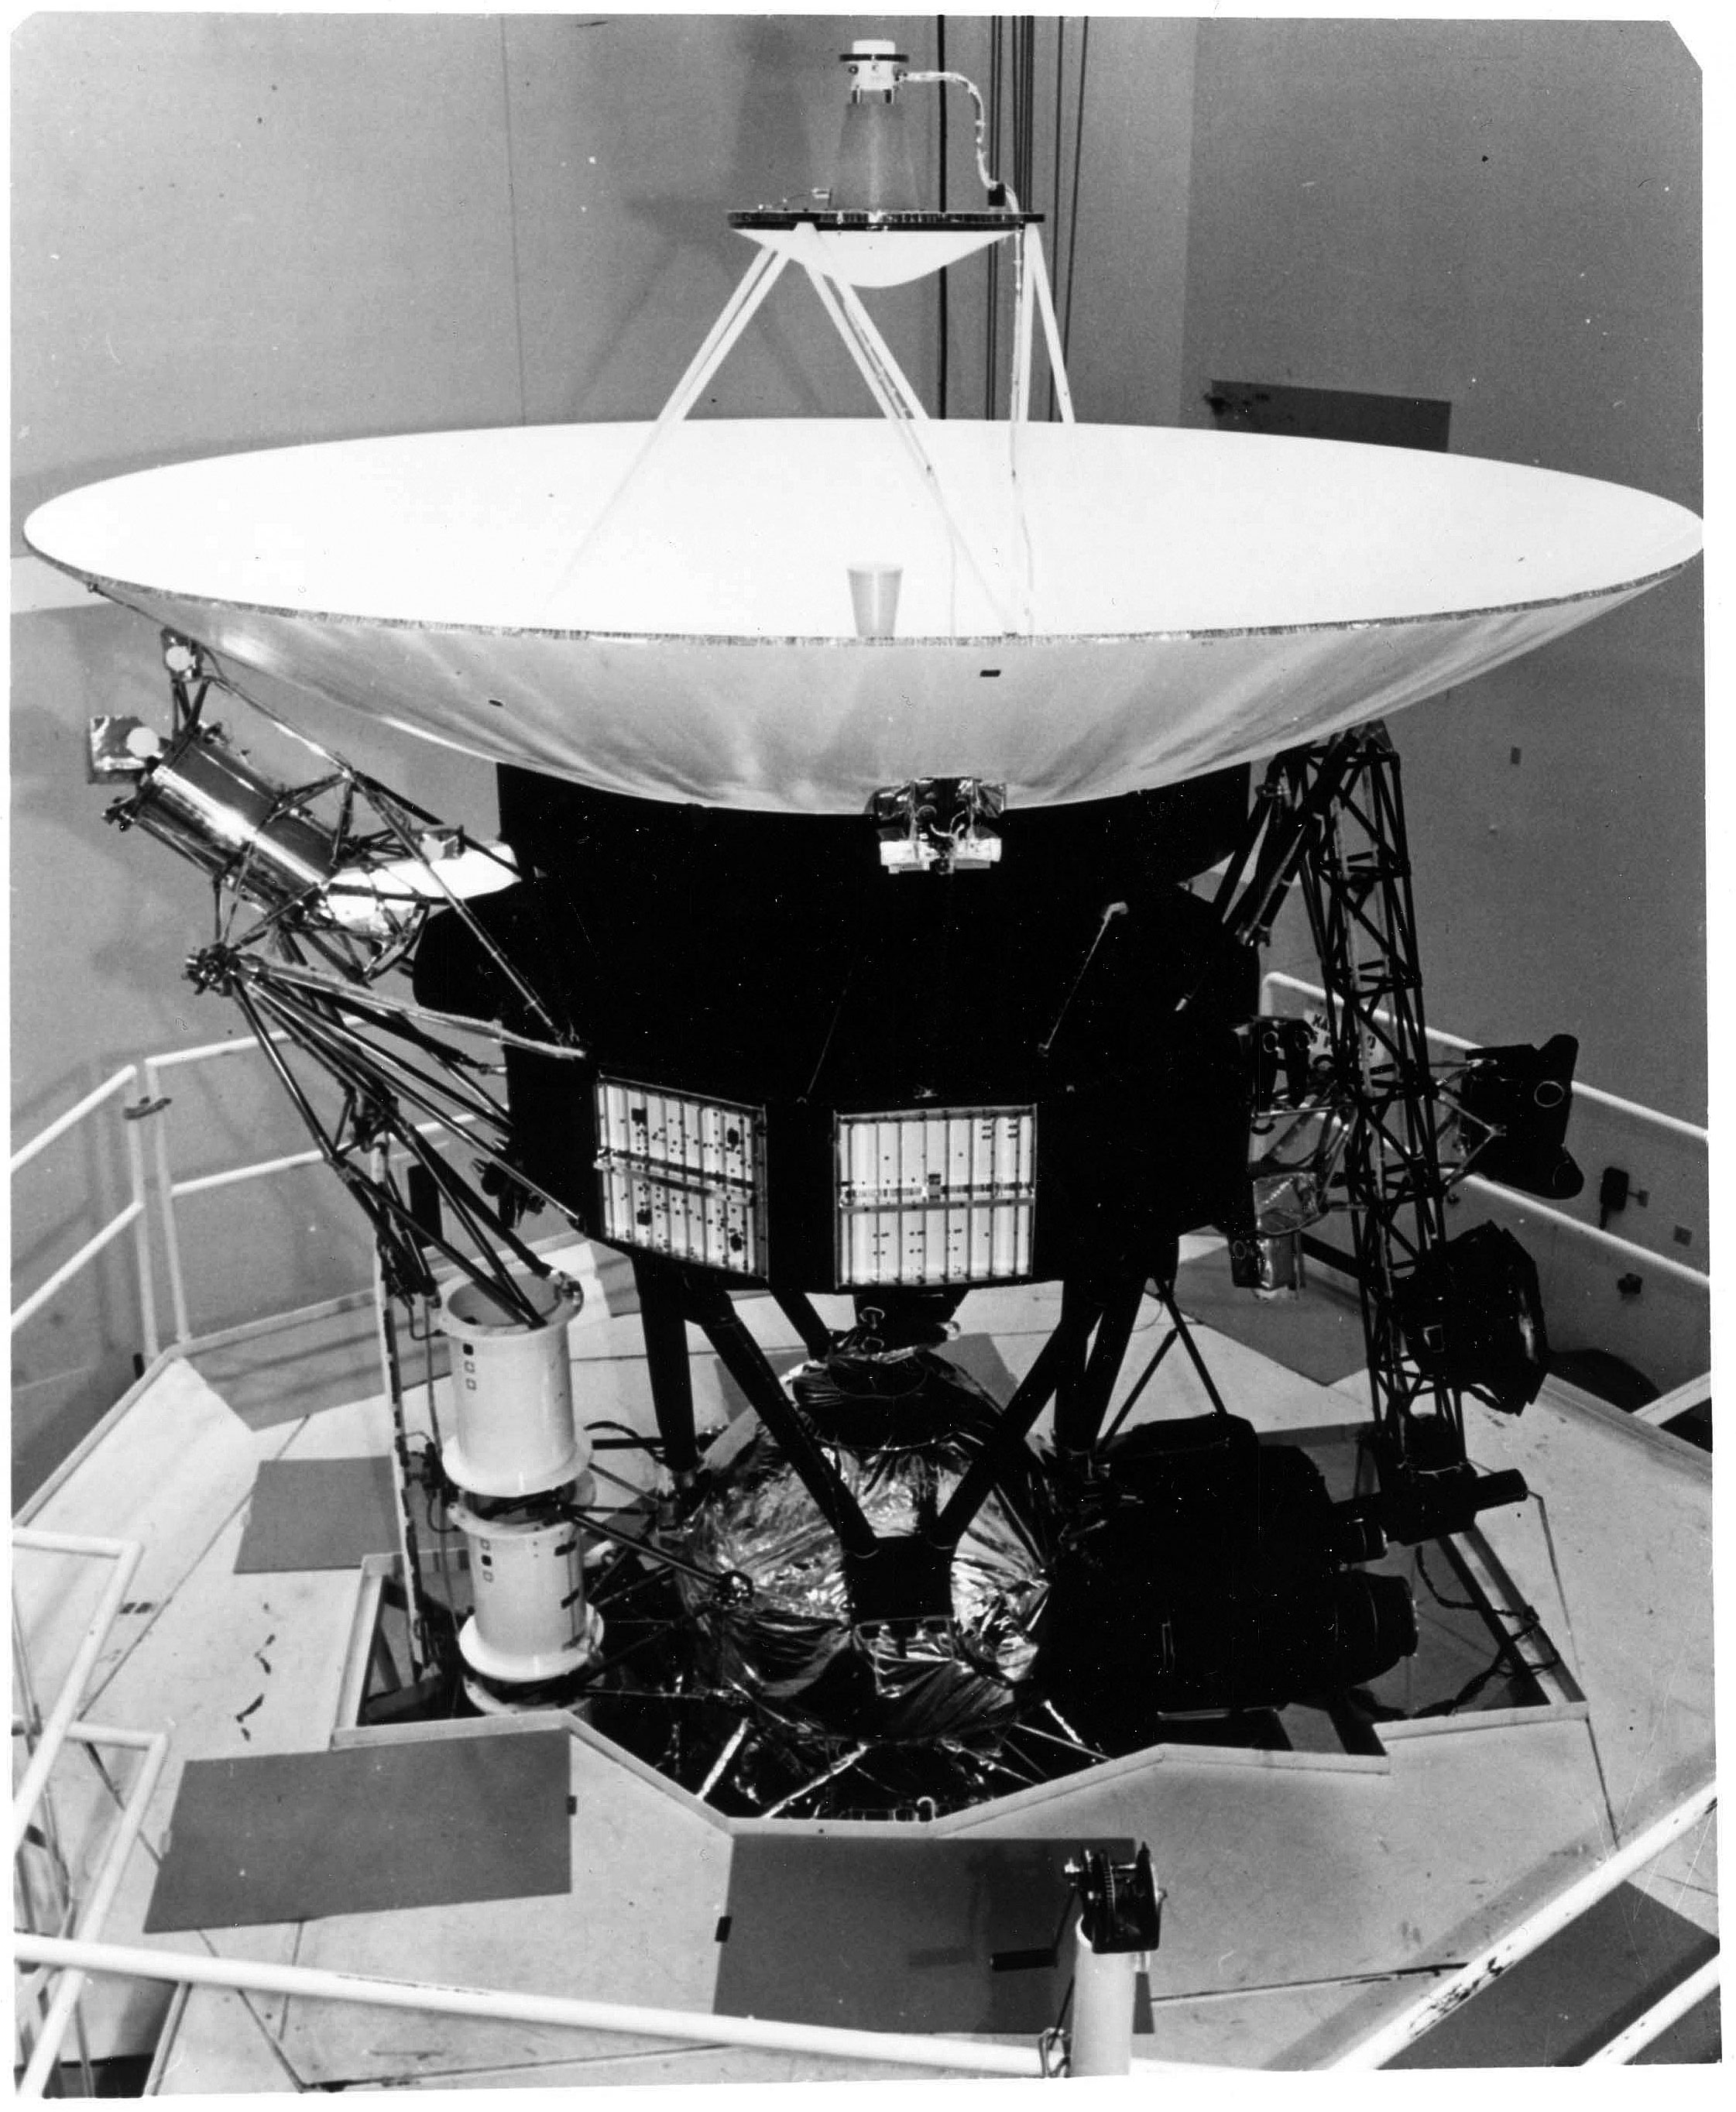 A prototype Voyager spacecraft is shown undergoing vibration tests at NASA’s Jet Propulsion Laboratory. Credit: NASA/JPL